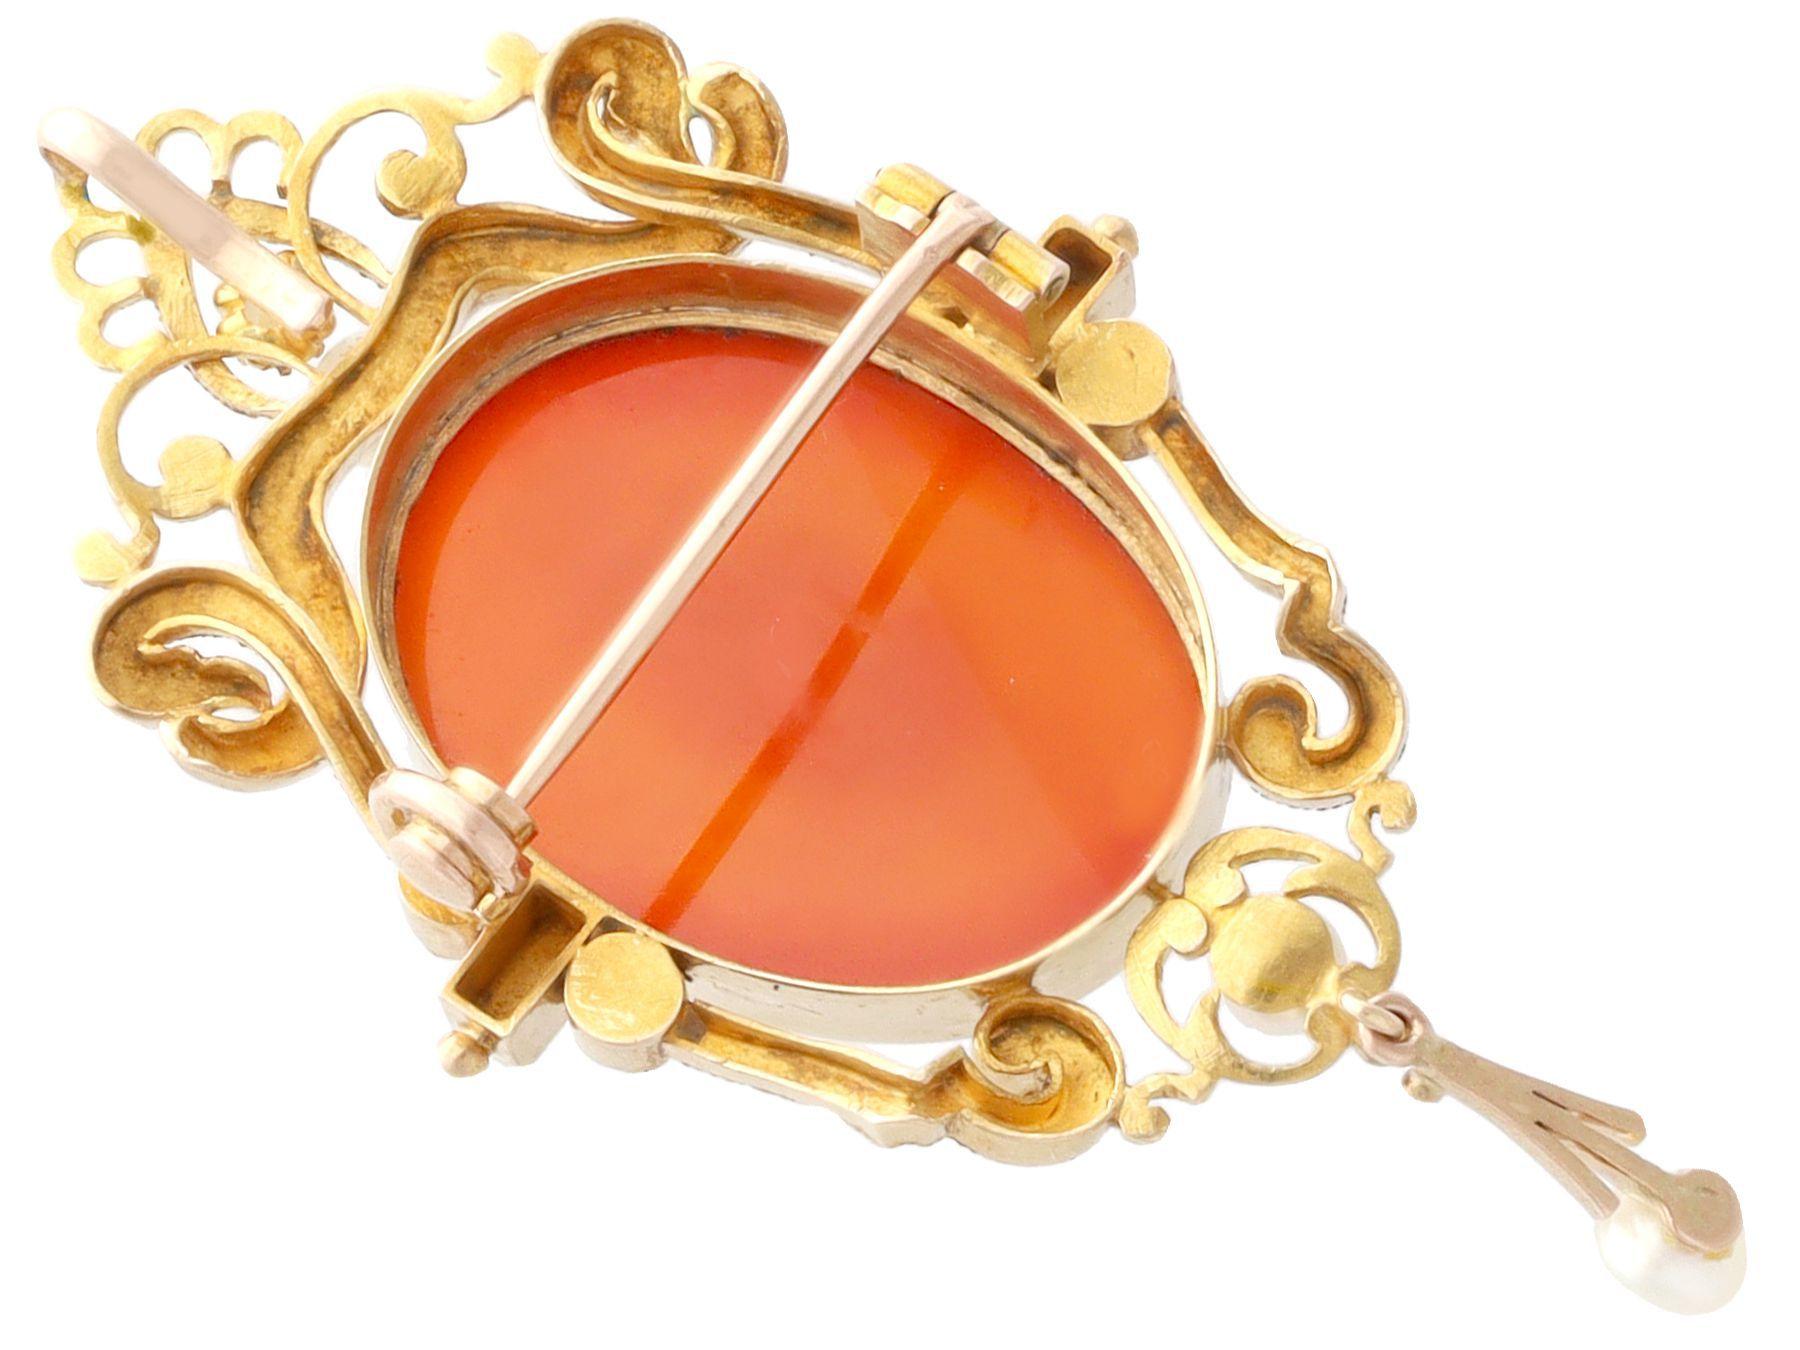 Antique 20.61 Quartz Hardstone and Pearl Yellow Gold Cameo Brooch / Pendant In Excellent Condition For Sale In Jesmond, Newcastle Upon Tyne